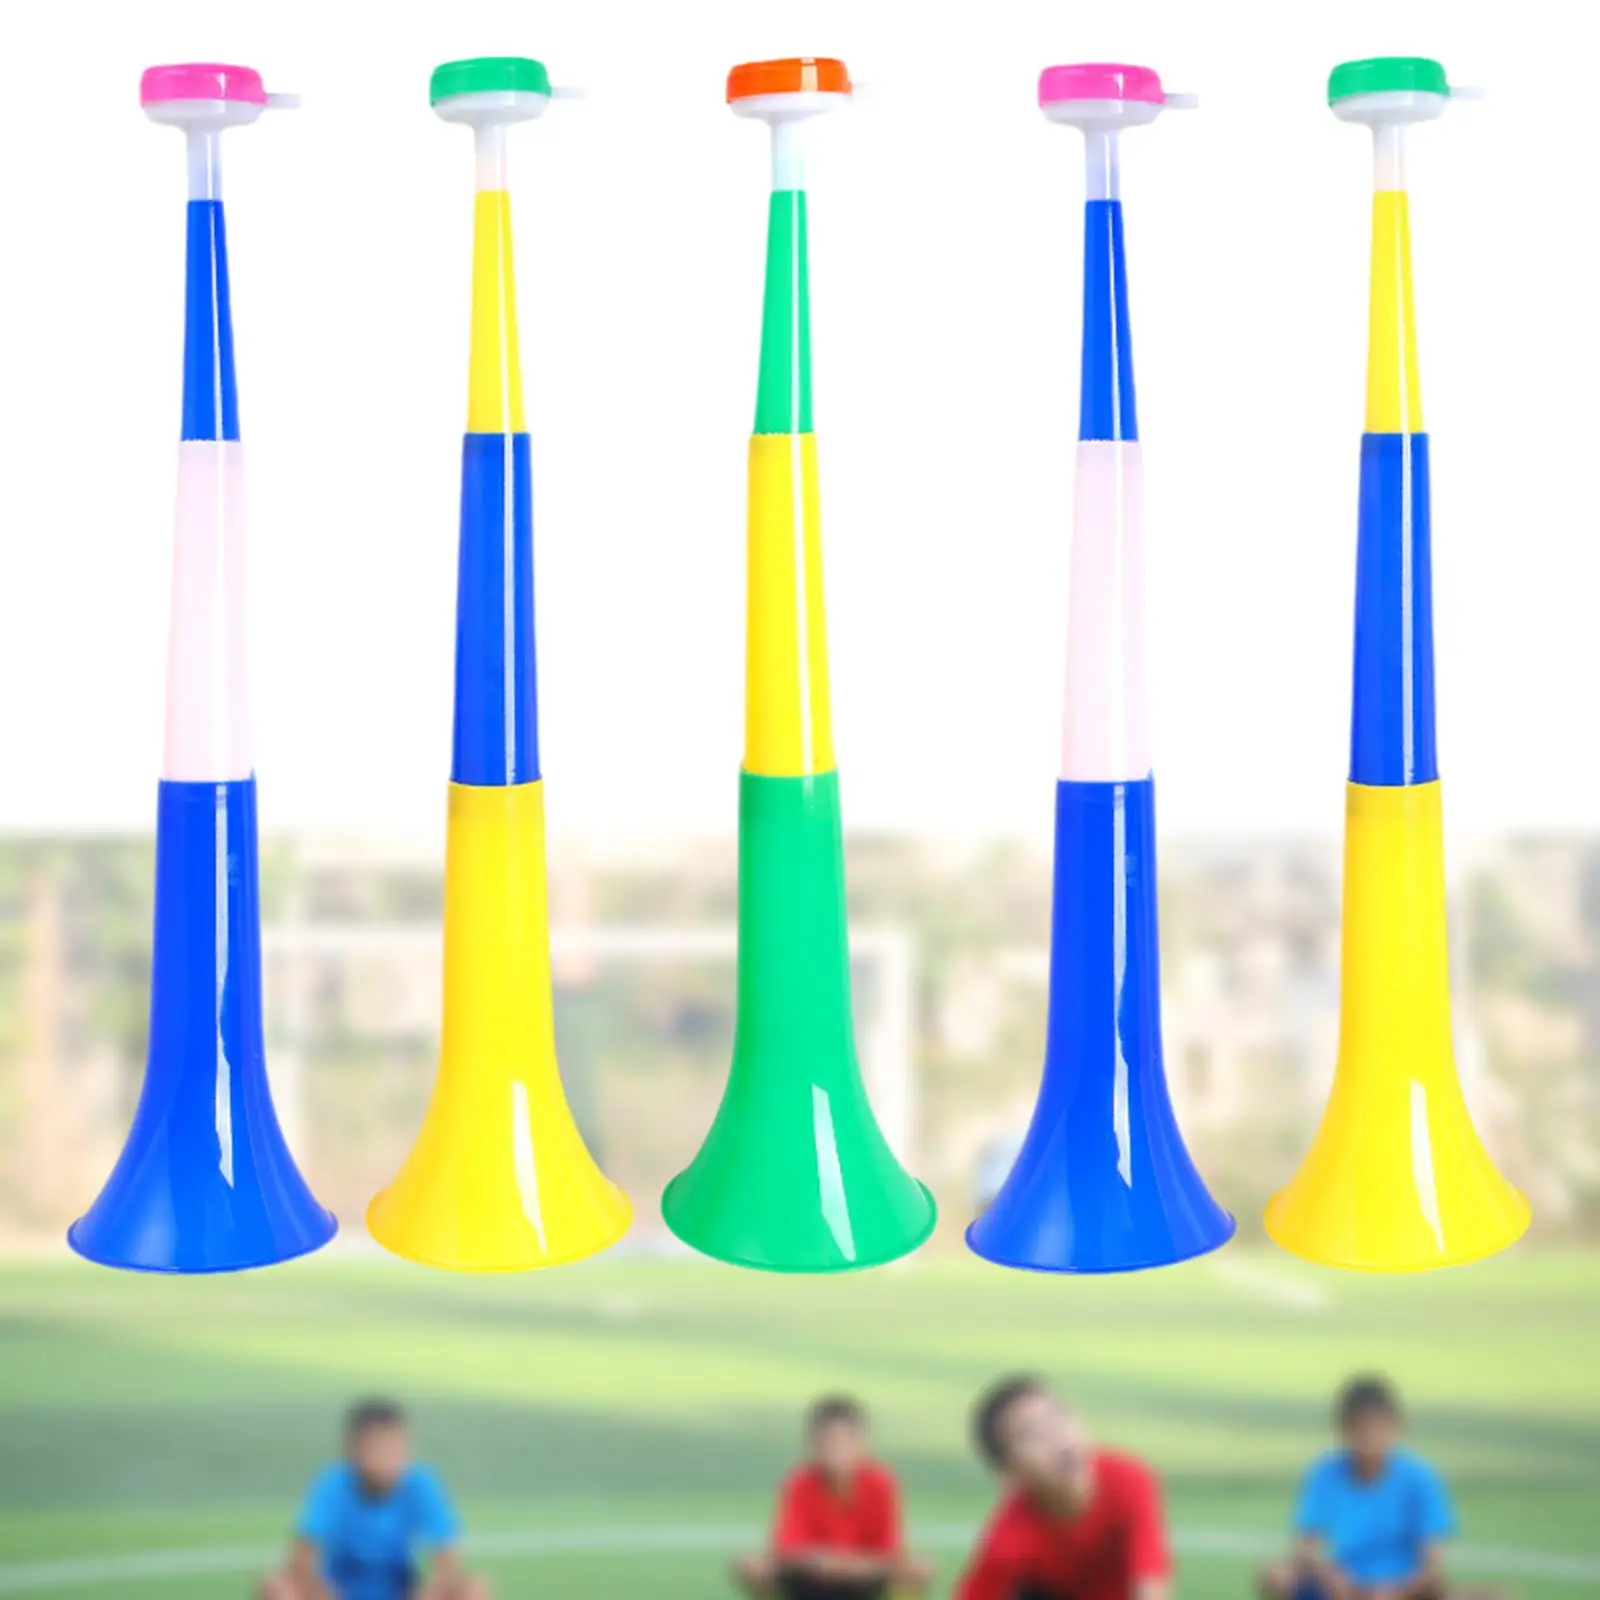 5x Football Loud Noise Makers Noisemakers Party Supplies Soccer Trumpet Toys for Festivals Sporting Sports Games Concerts Events